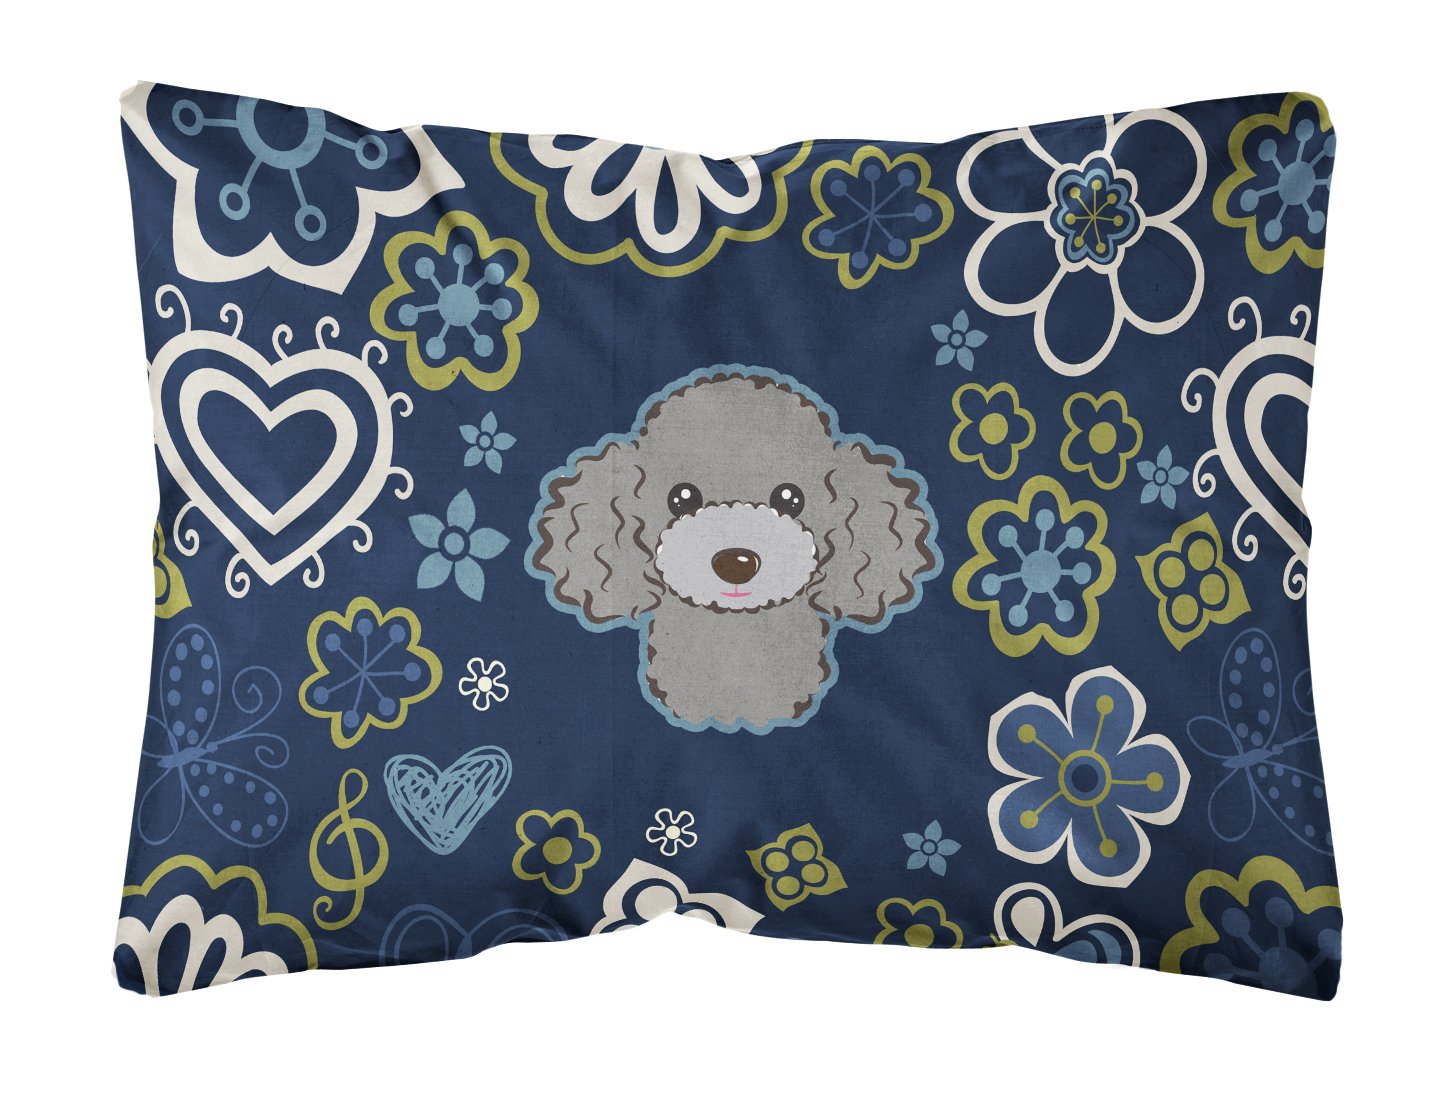 Blue Flowers Silver Gray Poodle Canvas Fabric Decorative Pillow BB5110PW1216 by Caroline's Treasures